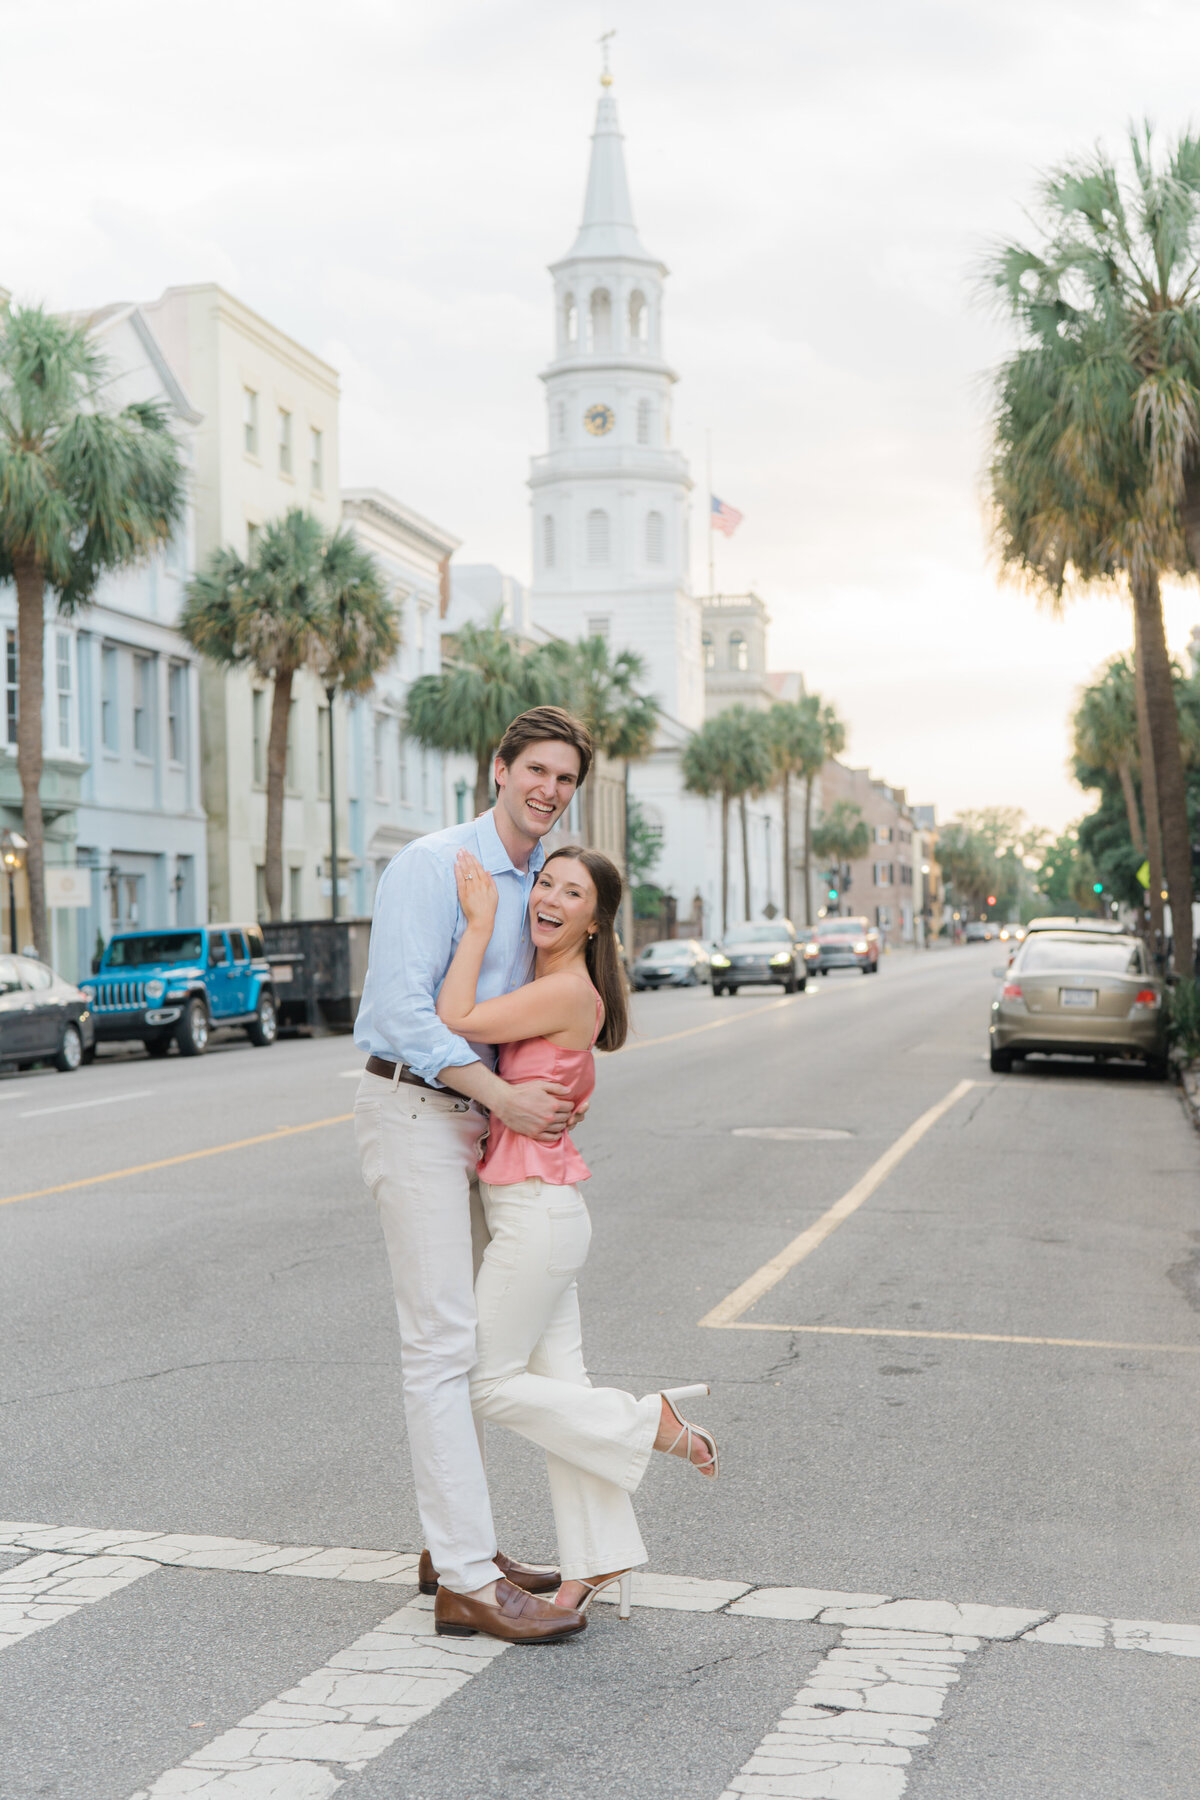 Broad street in Charleston. Palm trees and big church steeple. Couple standing in the crosswalk for cute engagement photo. Downtown Charleston engagement session. Kailee DiMeglio Photography.